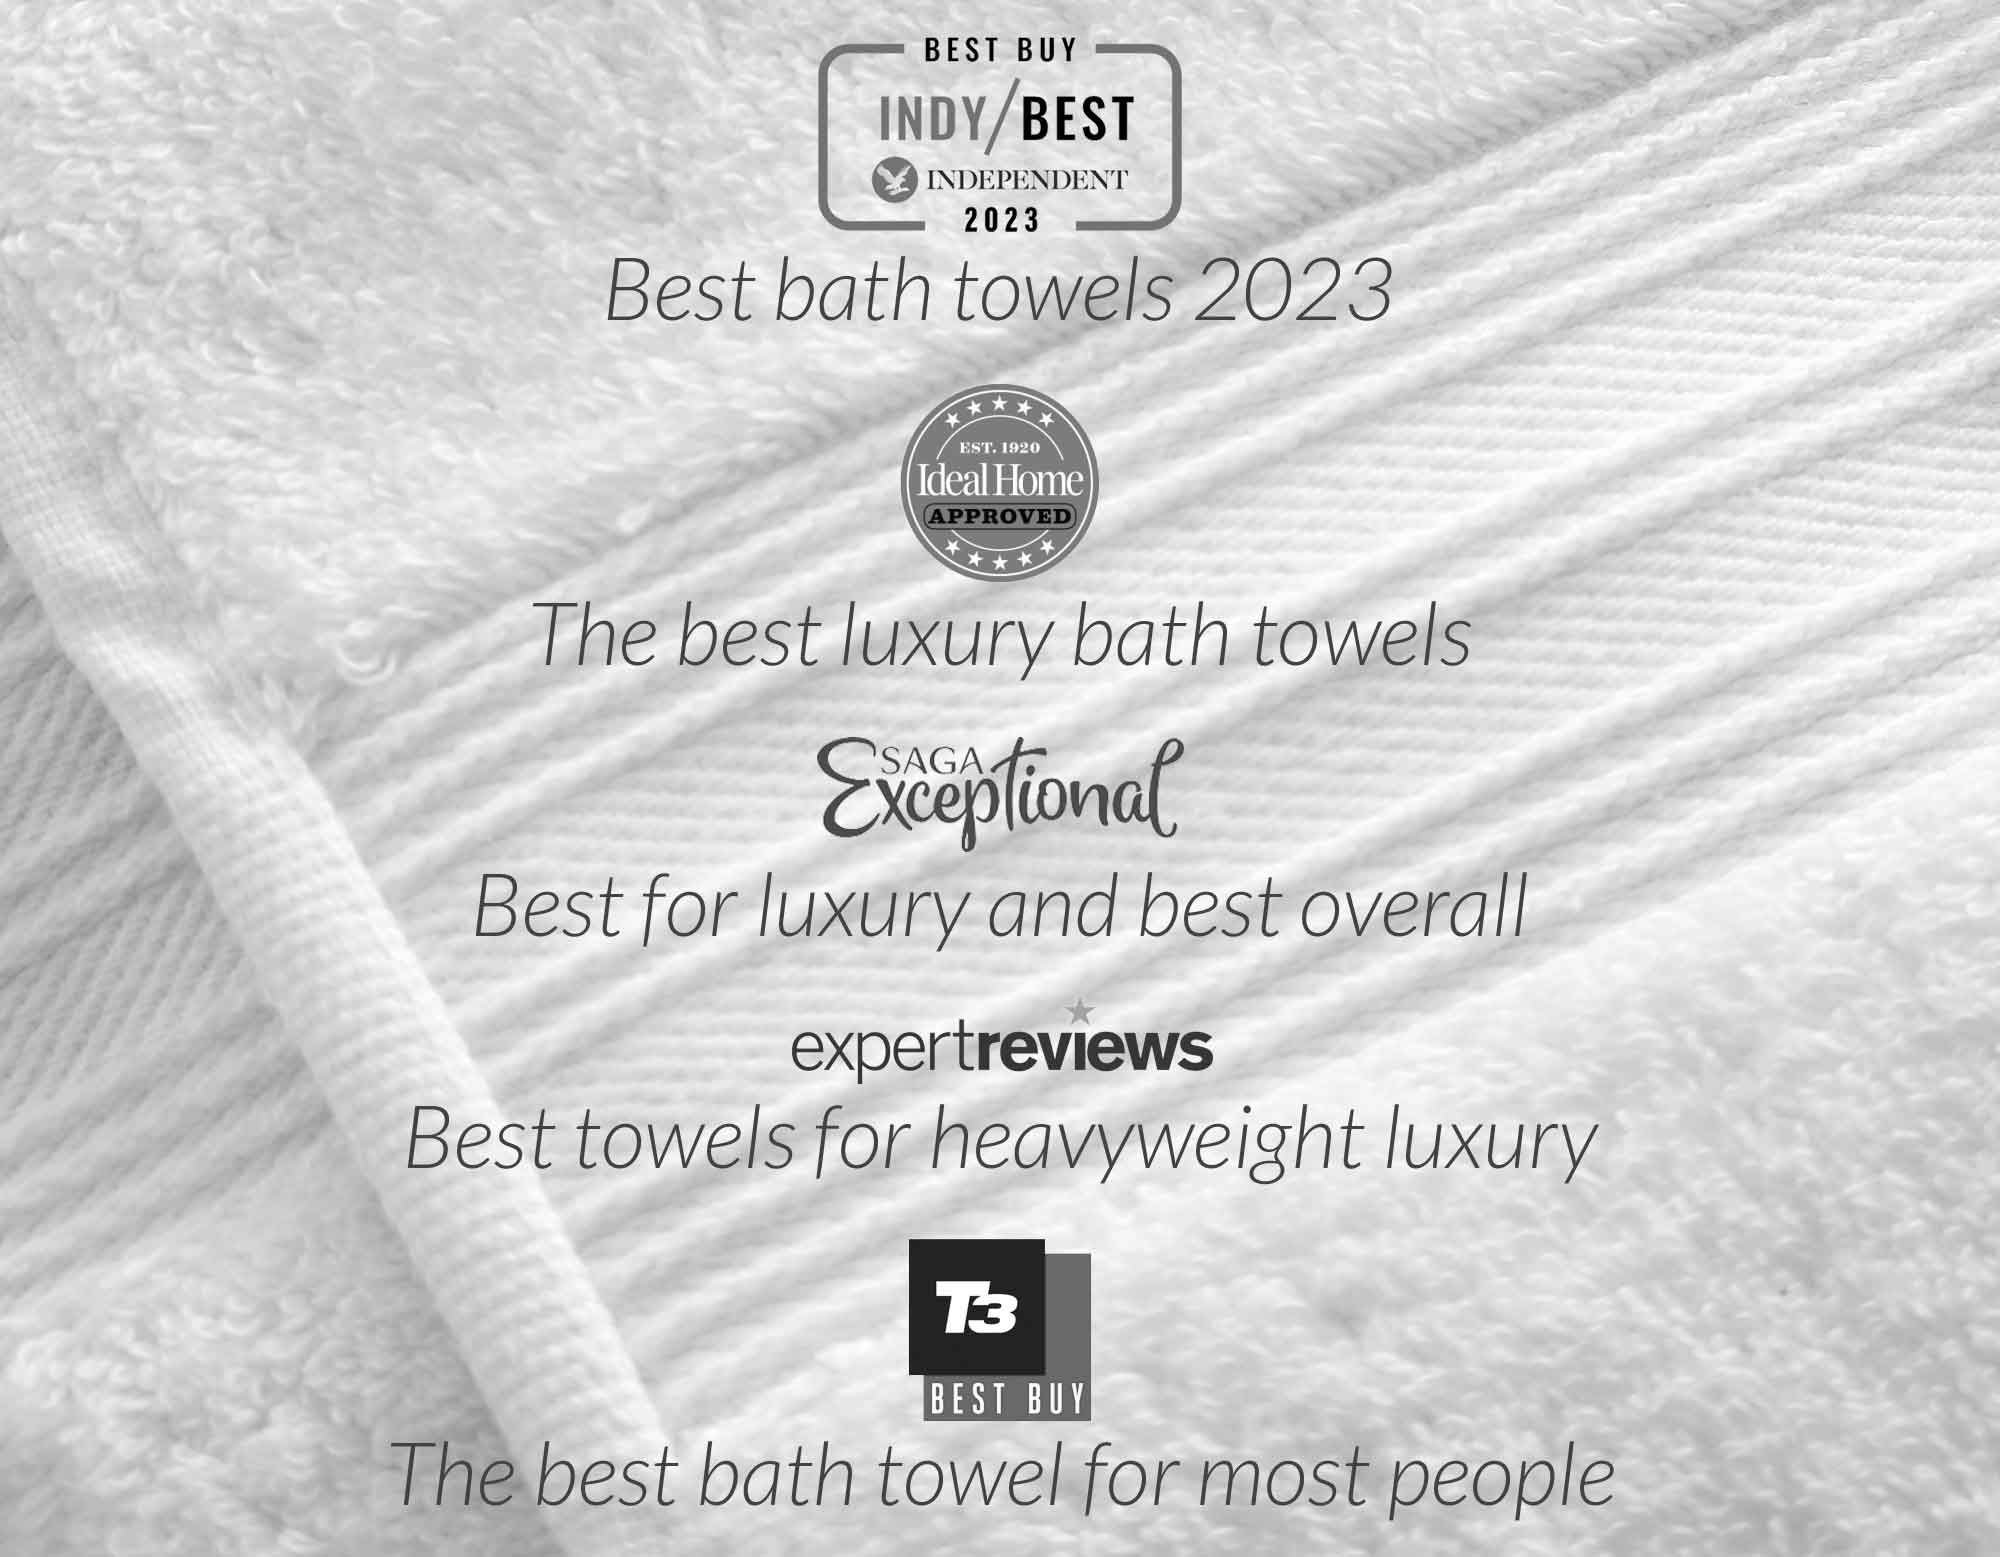 Best towel award logos Independent, IdealHome, Saga Exceptional, T3 and Expert Reviews